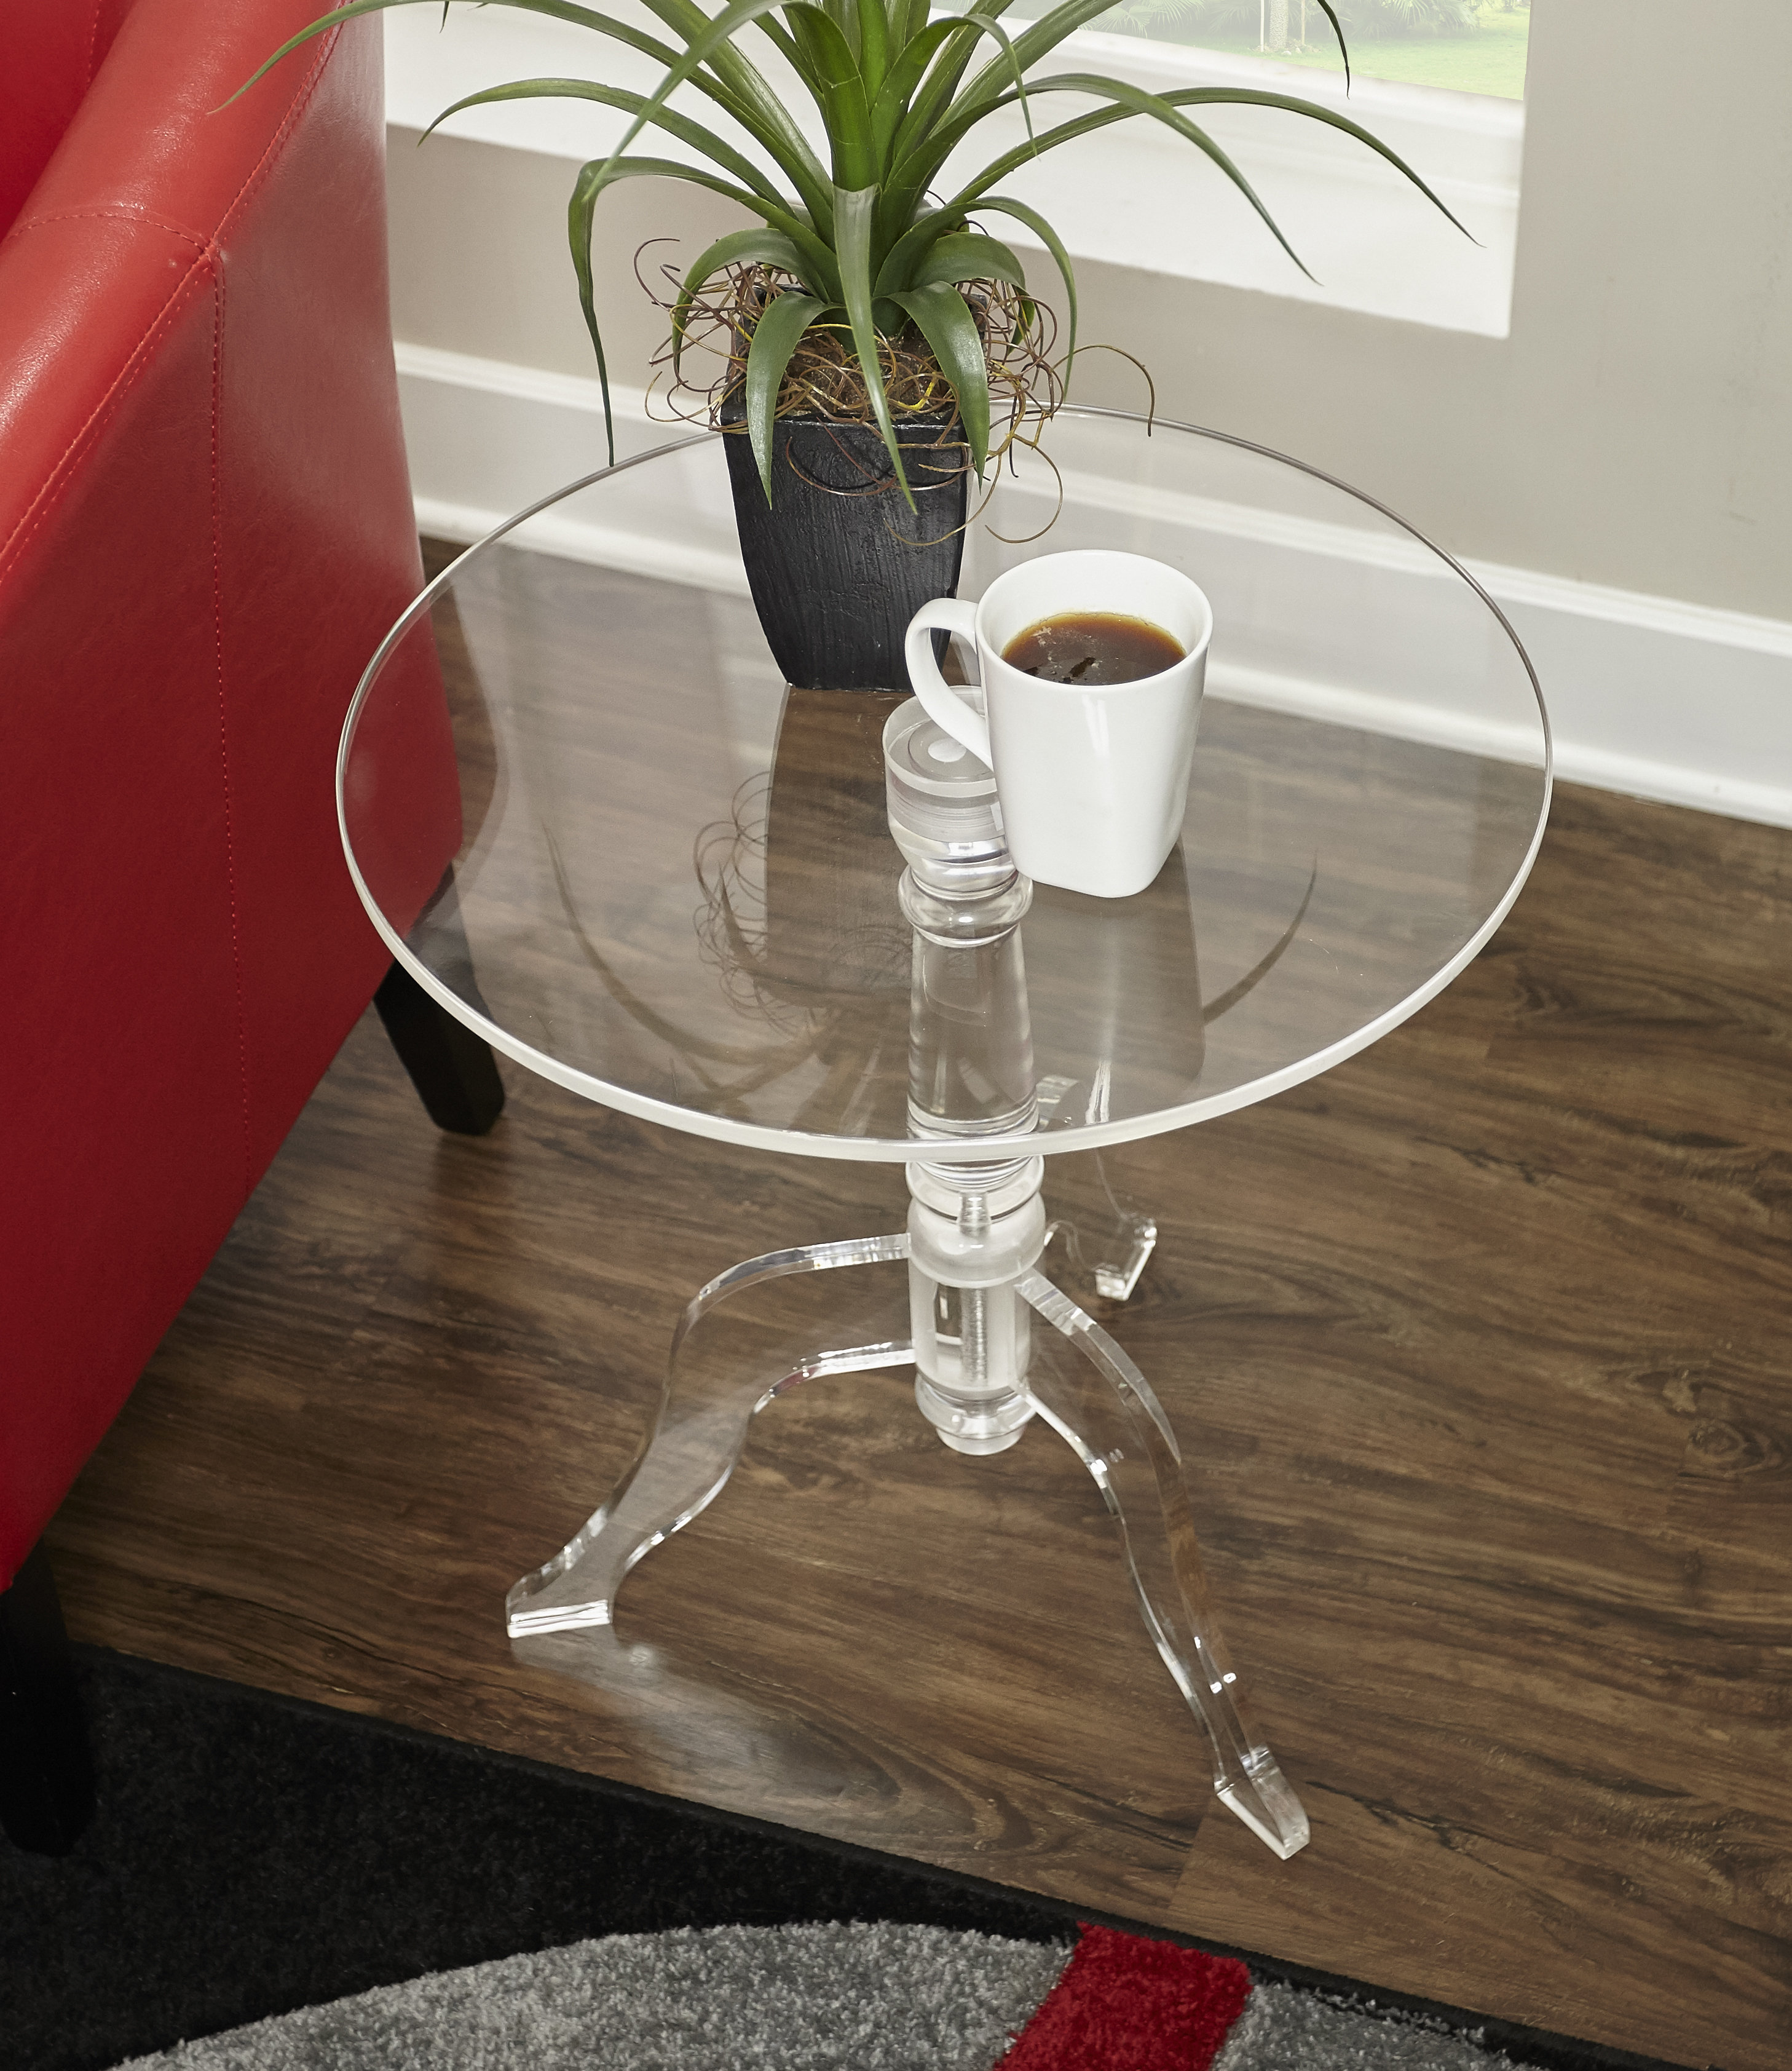 clear acrylic end table kreger zoey night accent with baskets walnut quickview target project rustoleum metal paint new home decor ideas making tables cream dining room chairs